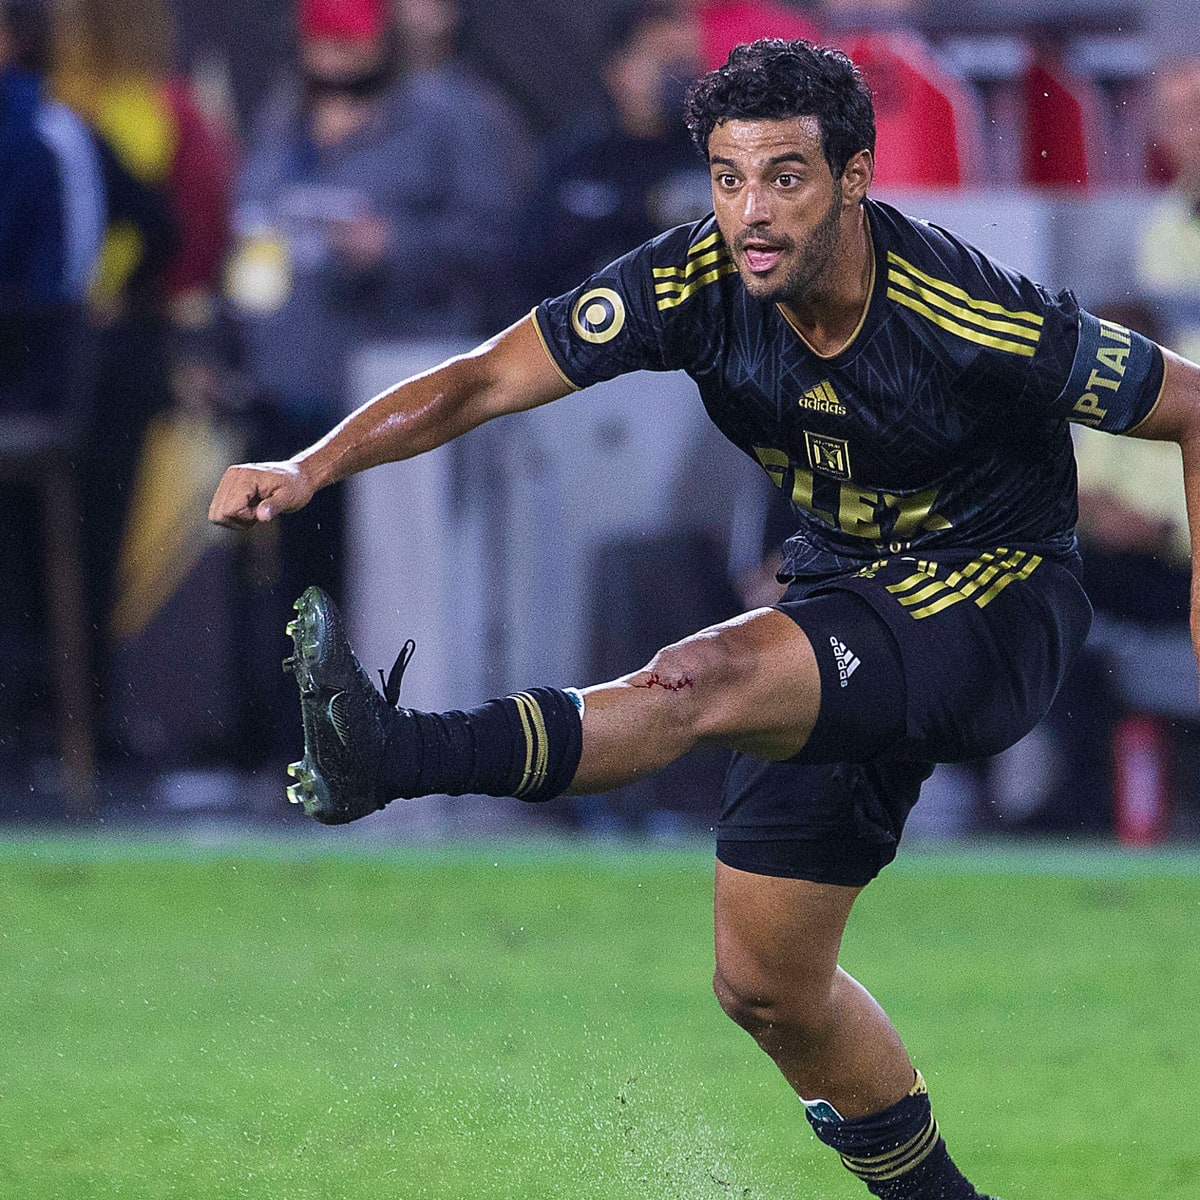 LAFC's Carlos Vela eager for upcoming chance to recharge – Daily News